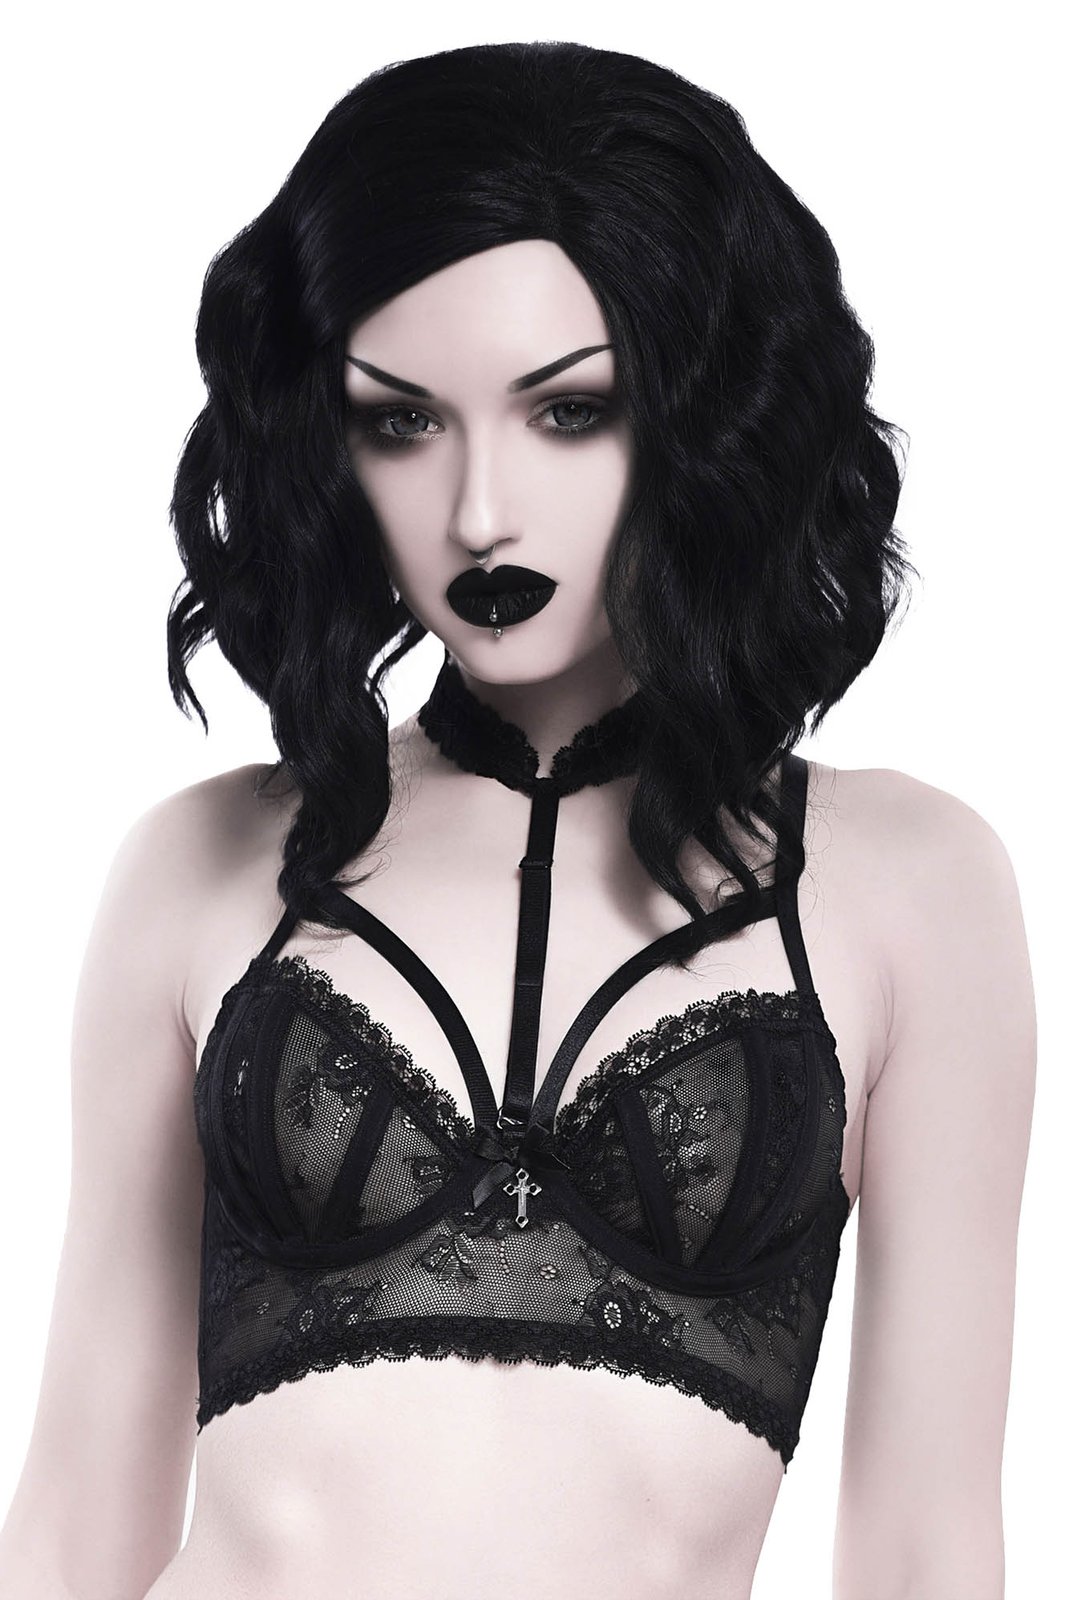 KILLS0252, NEW WITCH Alternative witch clothing and accessories